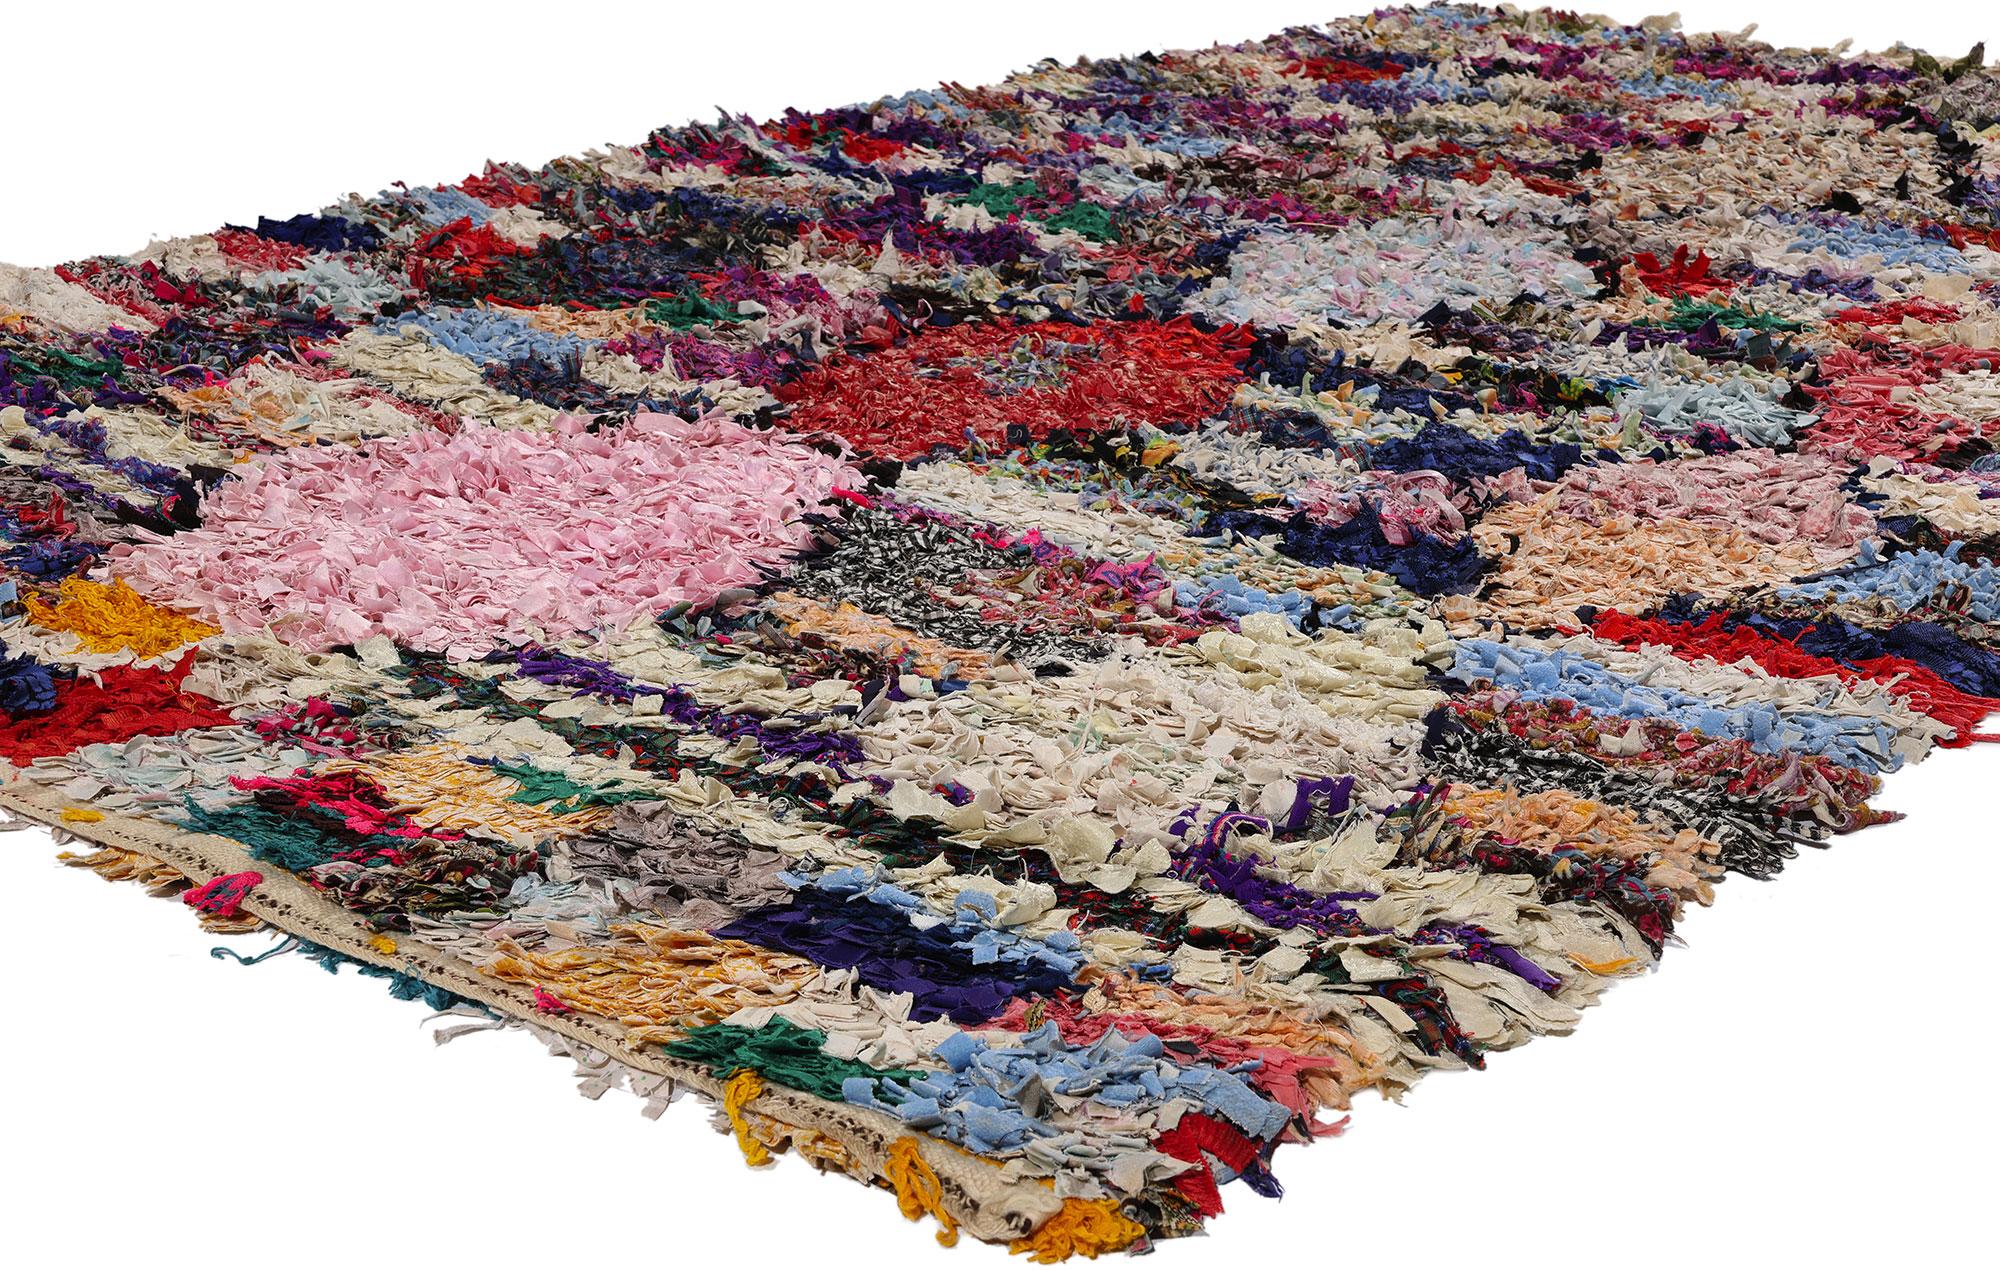 21786 Vintage Boucherouite Boujad Moroccan Rag Rug, 05'04 x 08'11. The Boujad rag rug, or Boujad Boucherouite rug, encapsulates the essence of sustainable craftsmanship, originating from the Boujad region in the Khouribga province of Morocco.